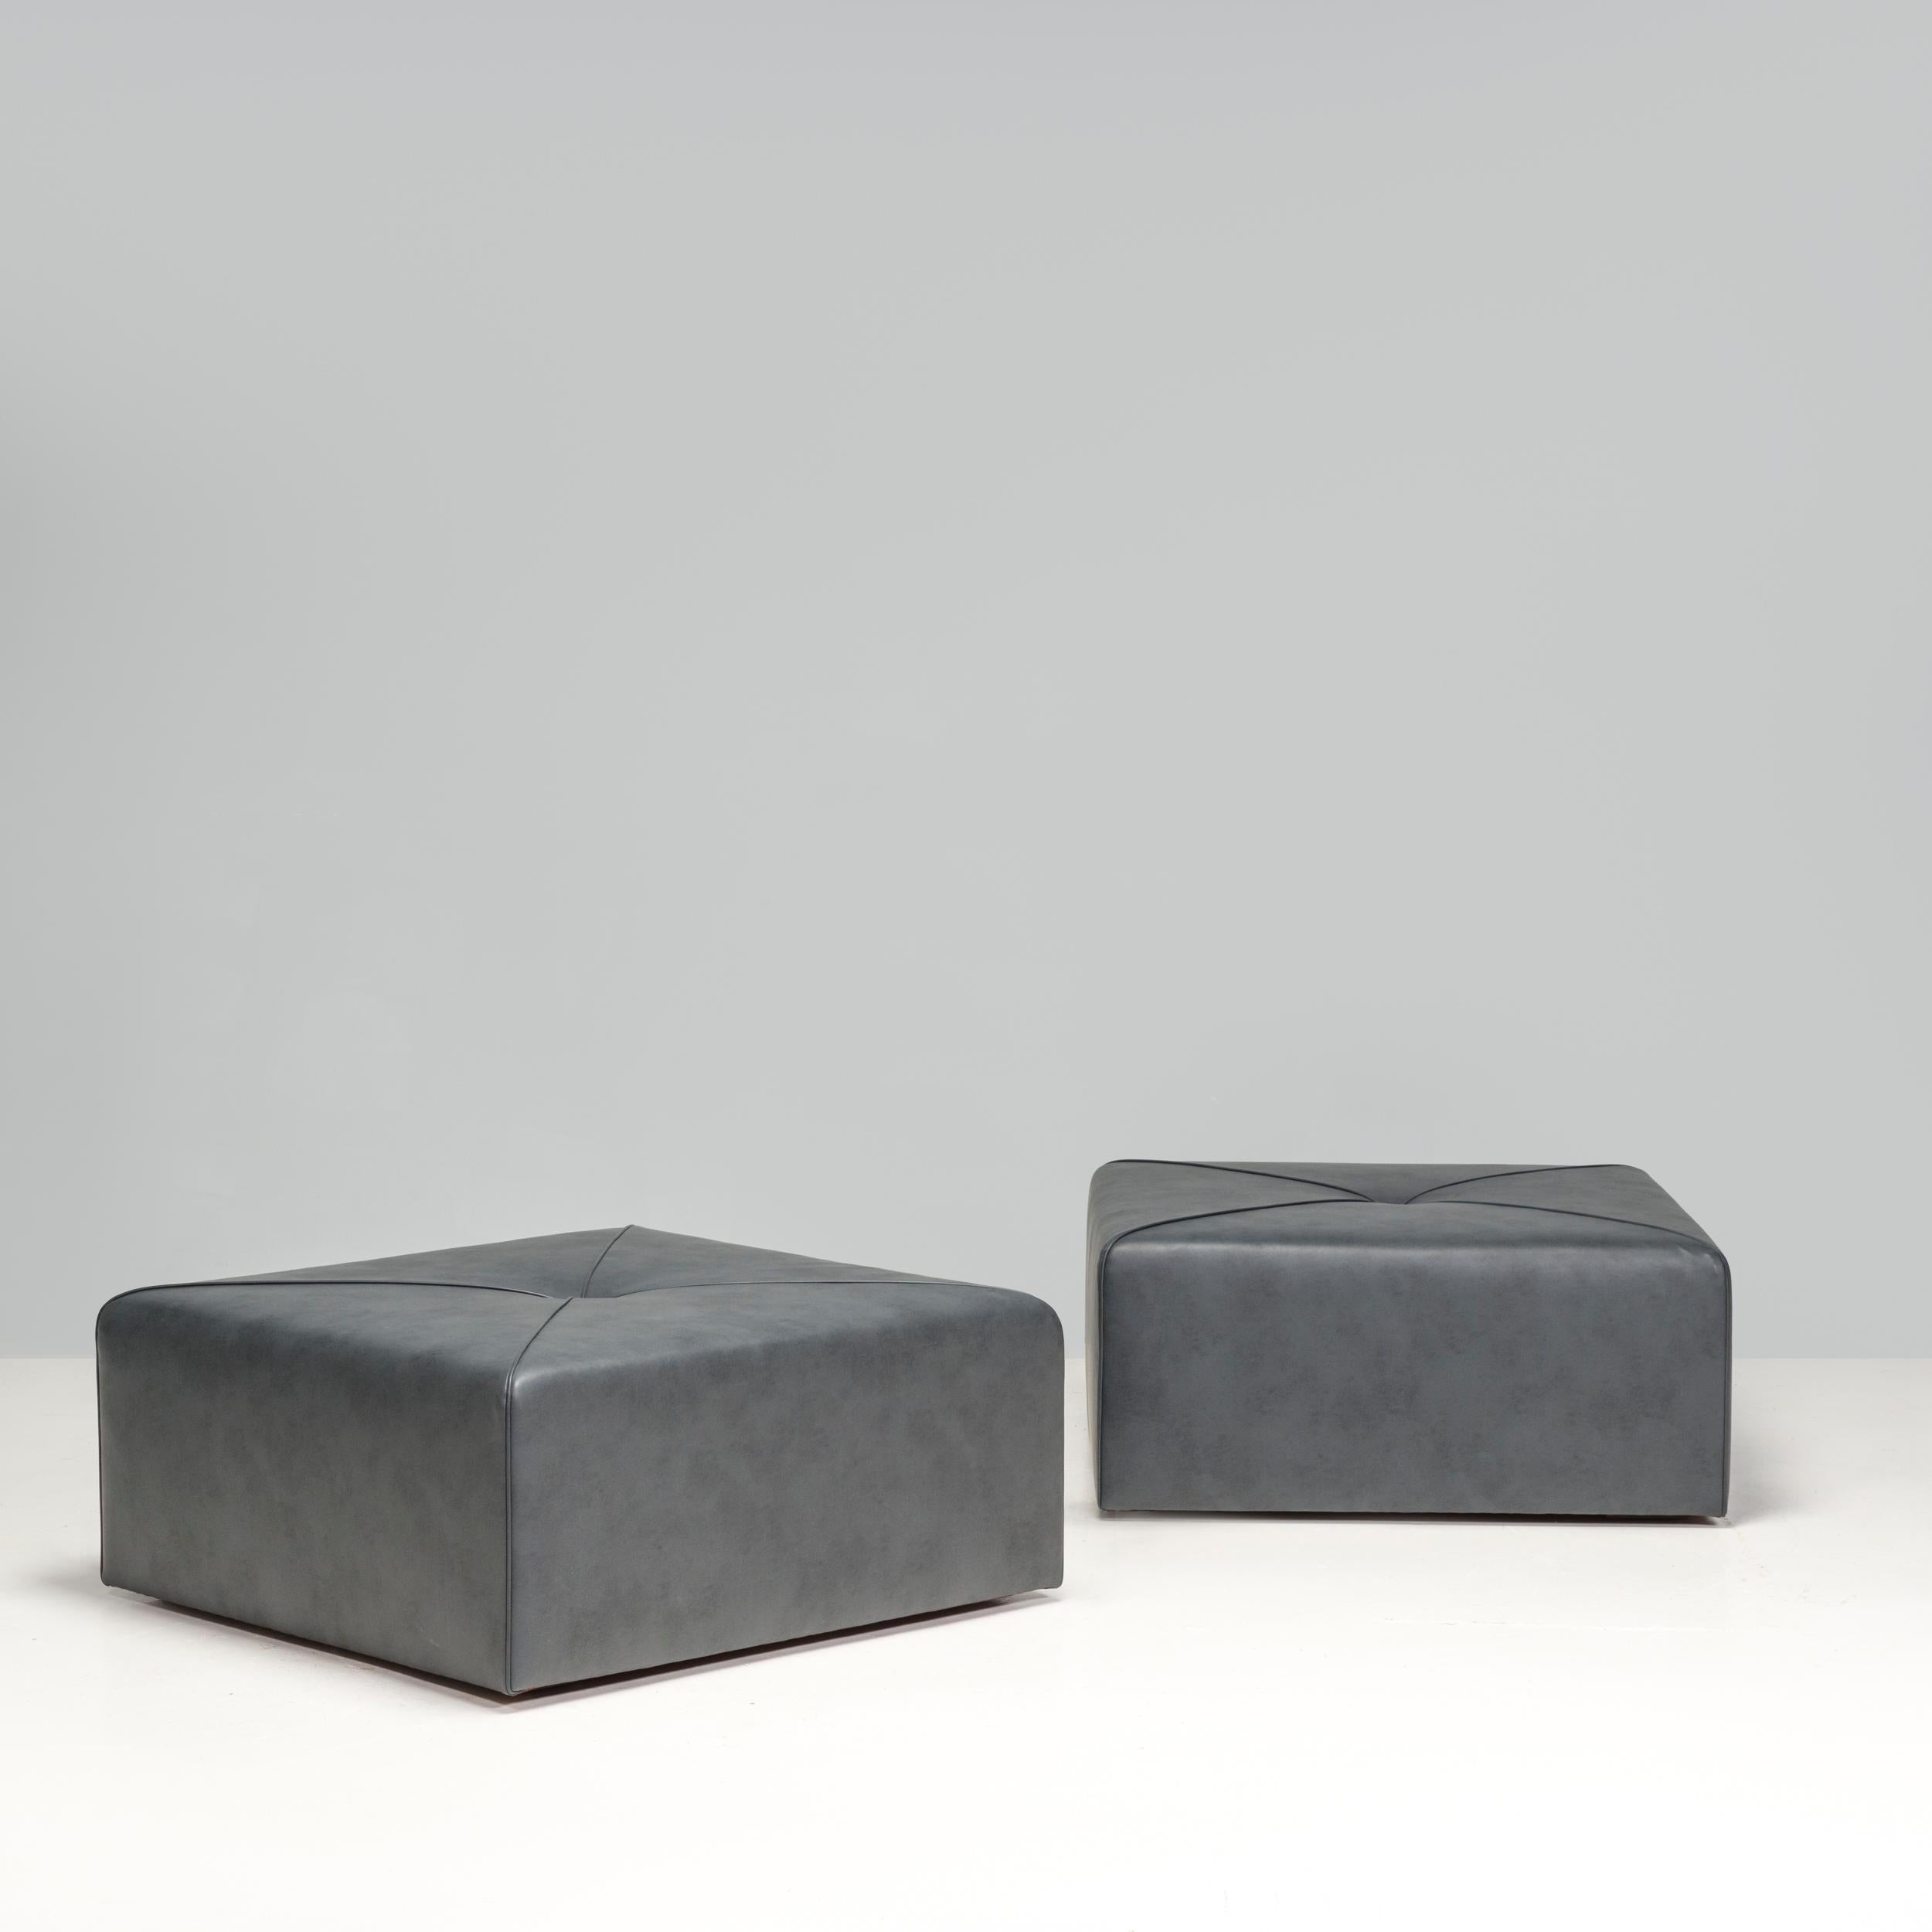 This bespoke square ottoman is the ultimate all-in-one lounging accessory with an edgy rustic design & high-quality finish is extremely versatile.

Boasting double seaming diamond pattern and faux dark grey leather, this striking piece maintains all